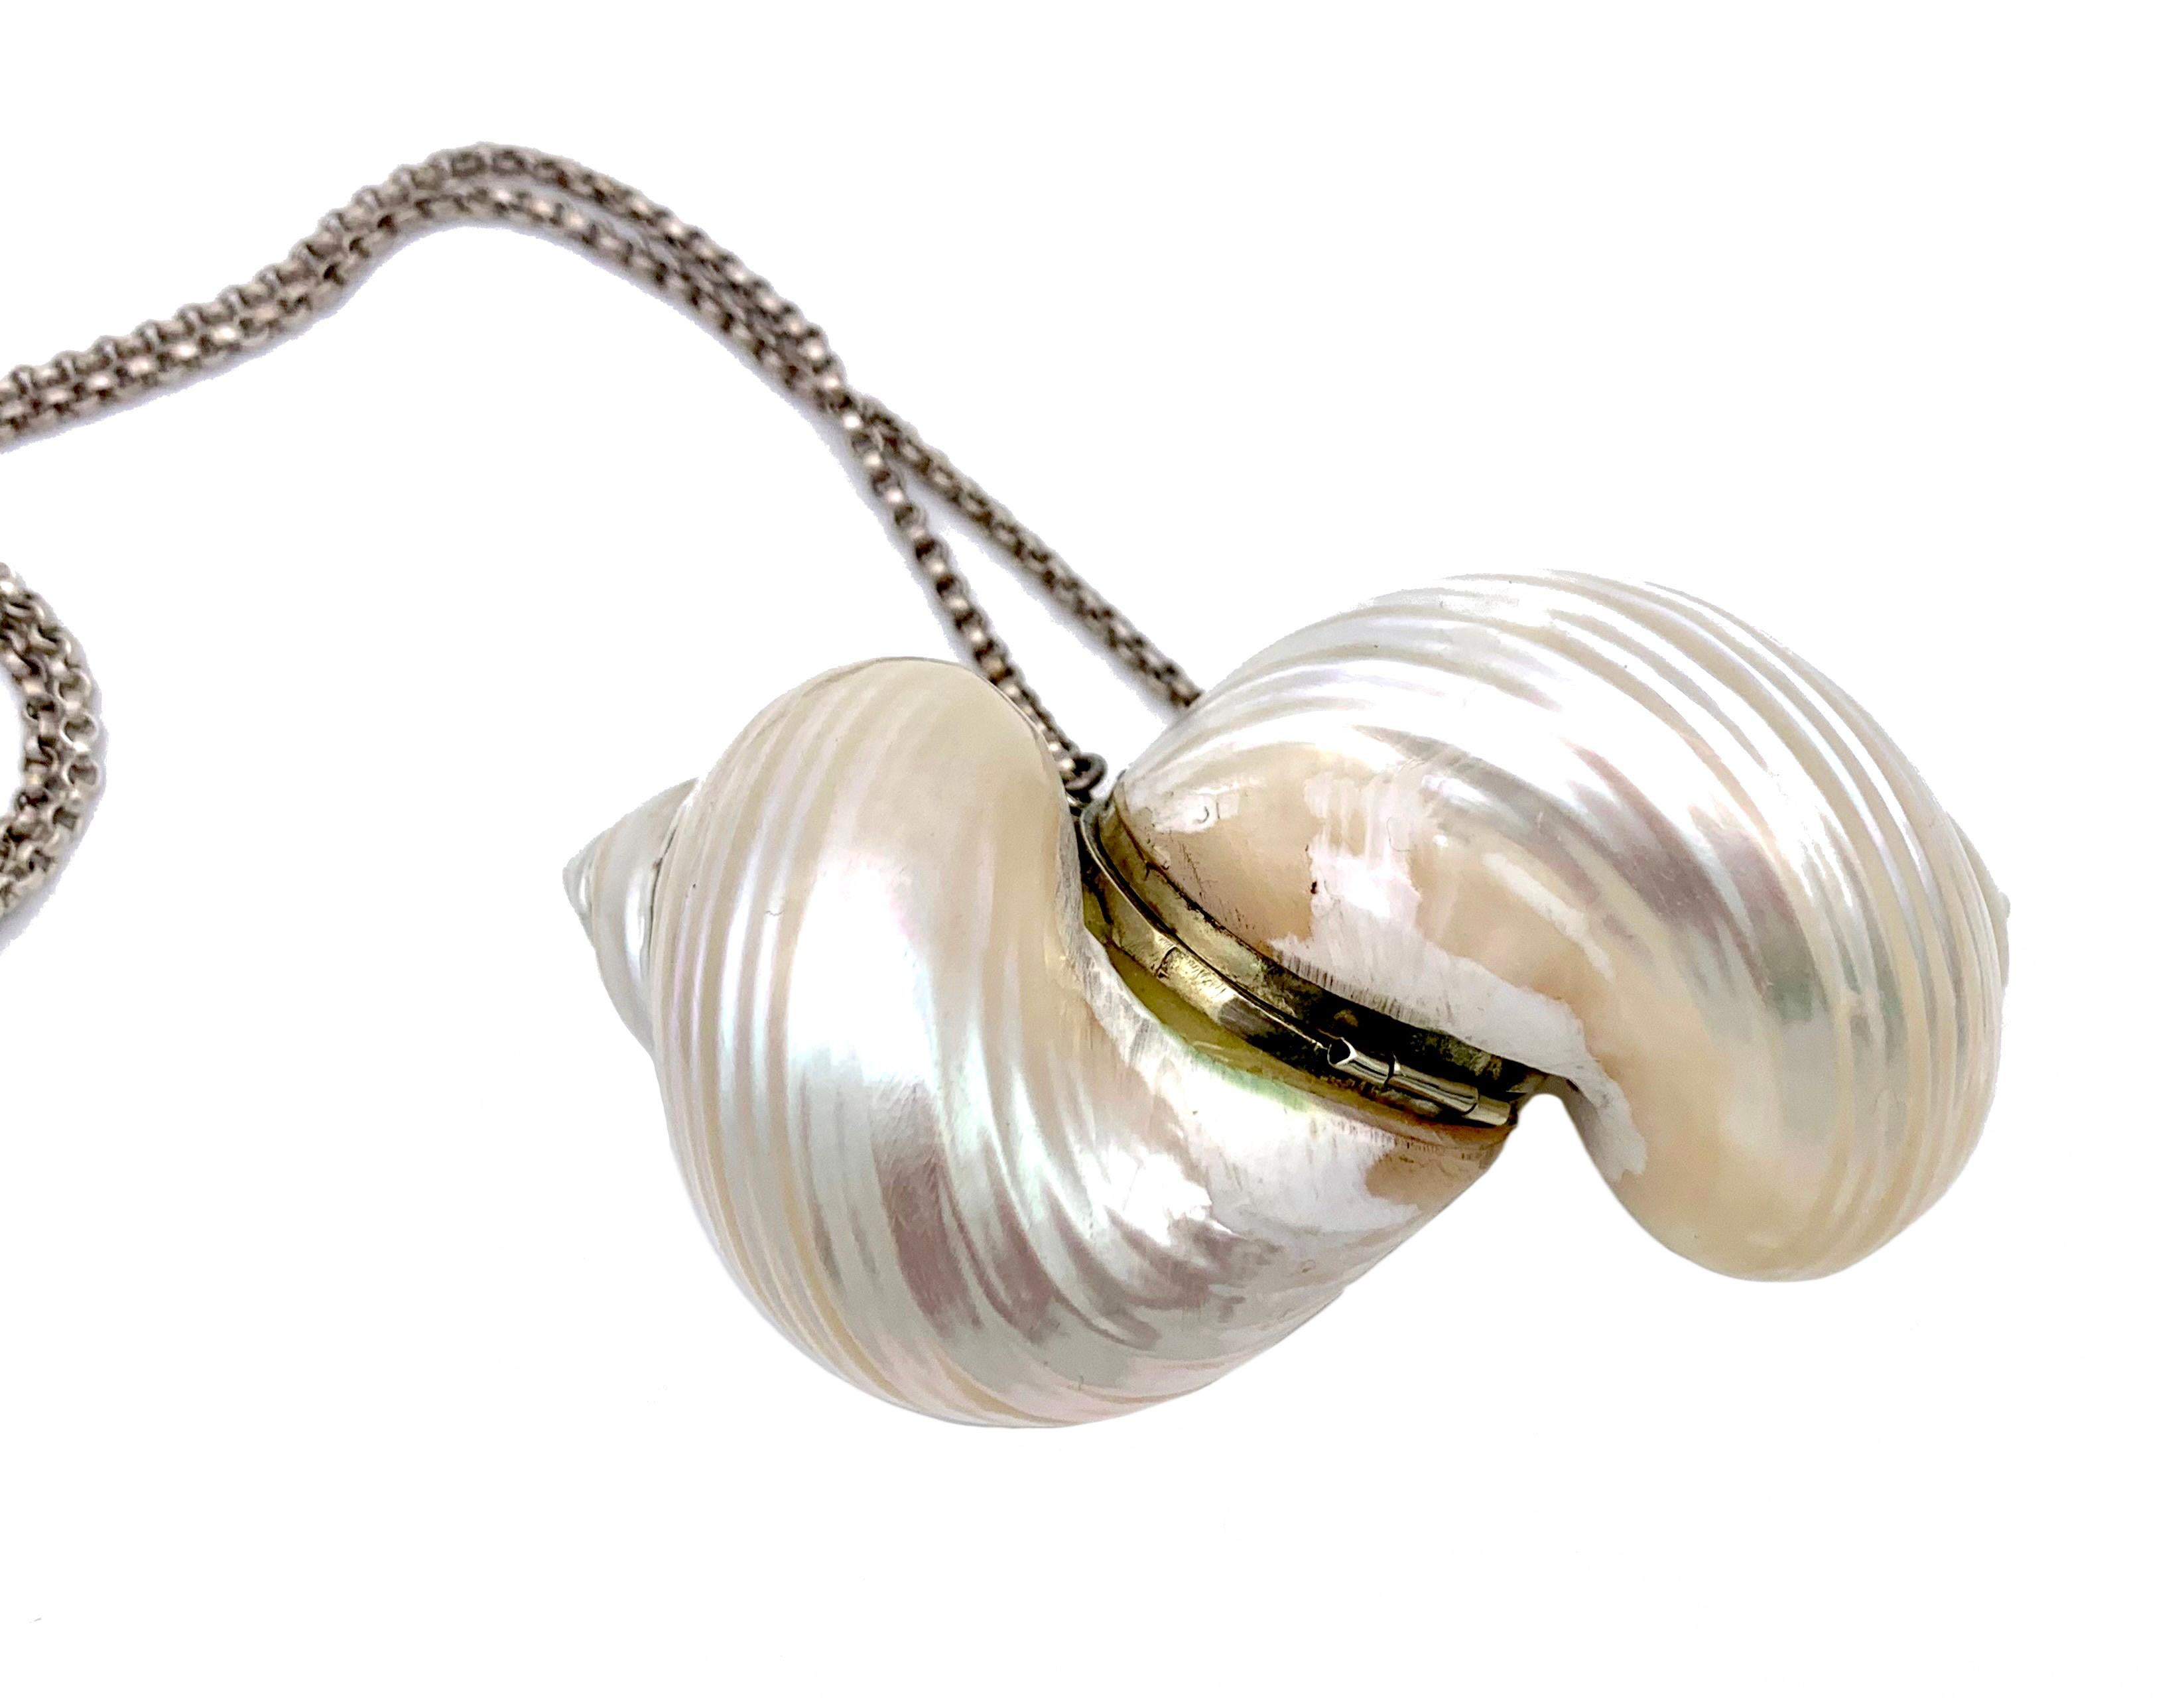 This late Victorian novelty purse was created out of two salt water shells and joined to a long silver guard chain. The shells have been mounted in a silver plated metal purse fitting. Both shells are in perfect condition and have a fine lustre. The